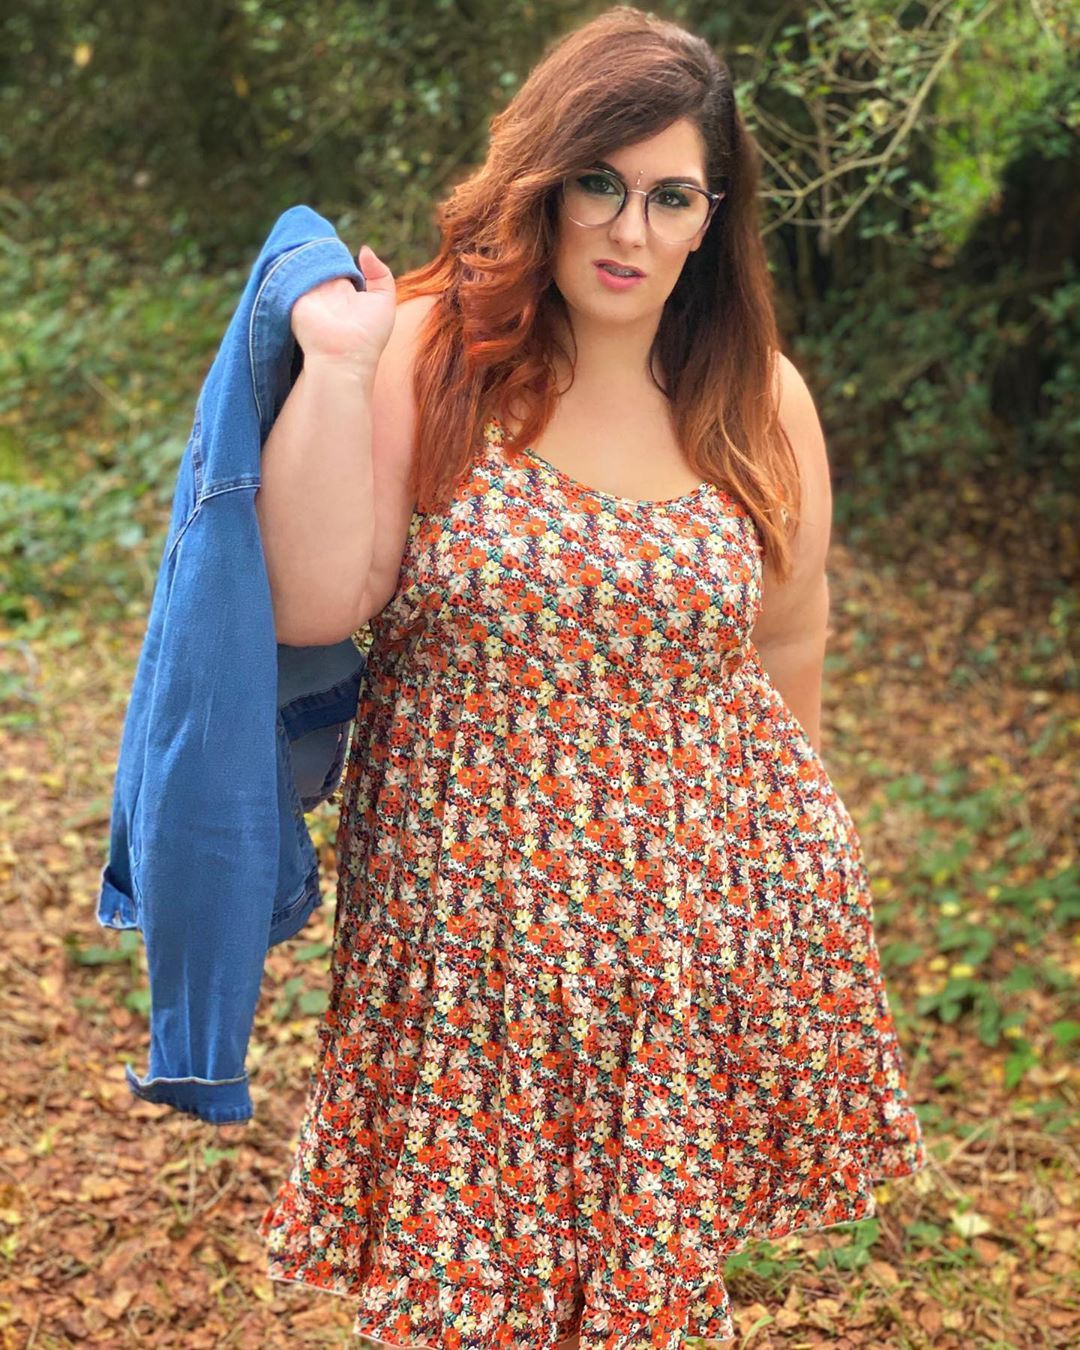 Rosegal - Plus Size Sundress, reviewed by @evagonzs⁣
Shop via the bio, Search ID: 470110004⁣
Price: $15.10⁣
Use Code: RGH20 to enjoy 18% off!⁣
#rosegal #plussizefashion #Rosegalcurvygirl #curvygirl⁣
N...